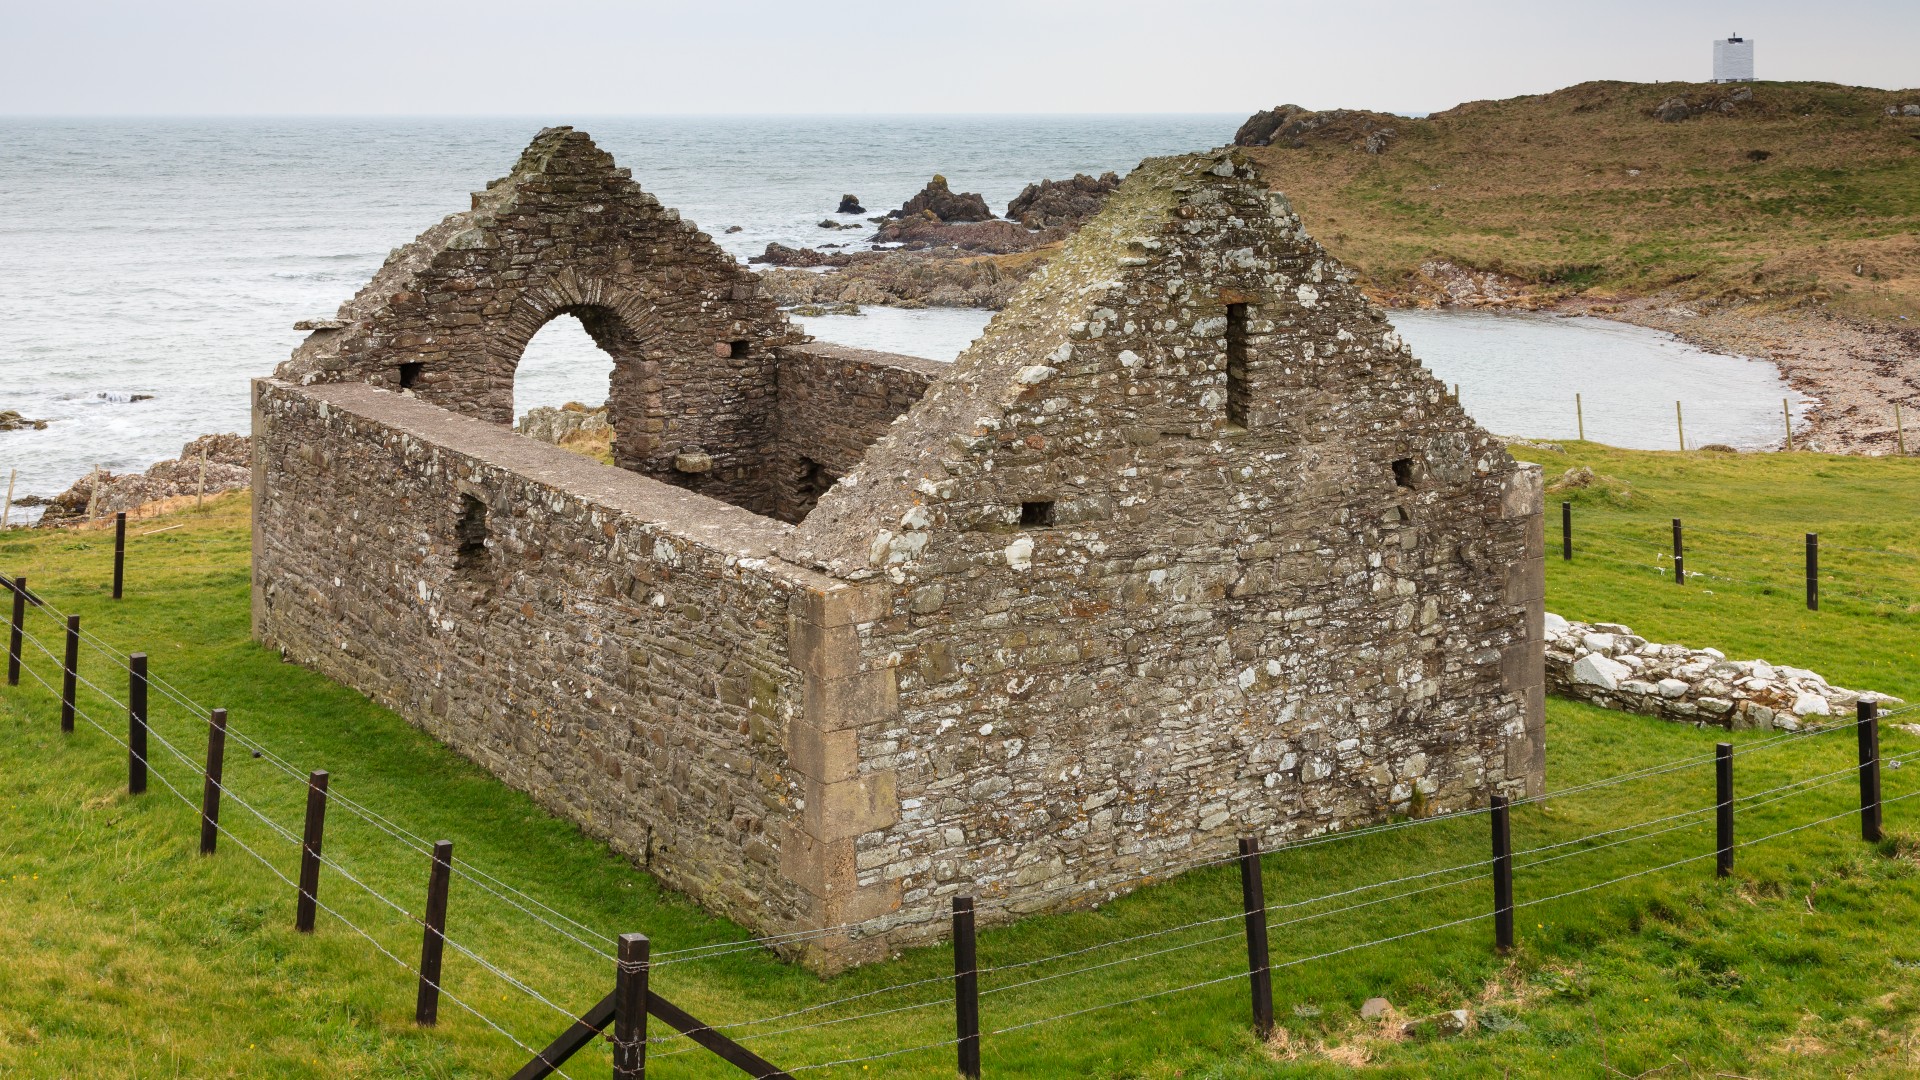 Saint Ninian's Chapel in the Isle of Whithorn in Dumfries and Galloway, Southern Scotland. ATGImages via Getty Images